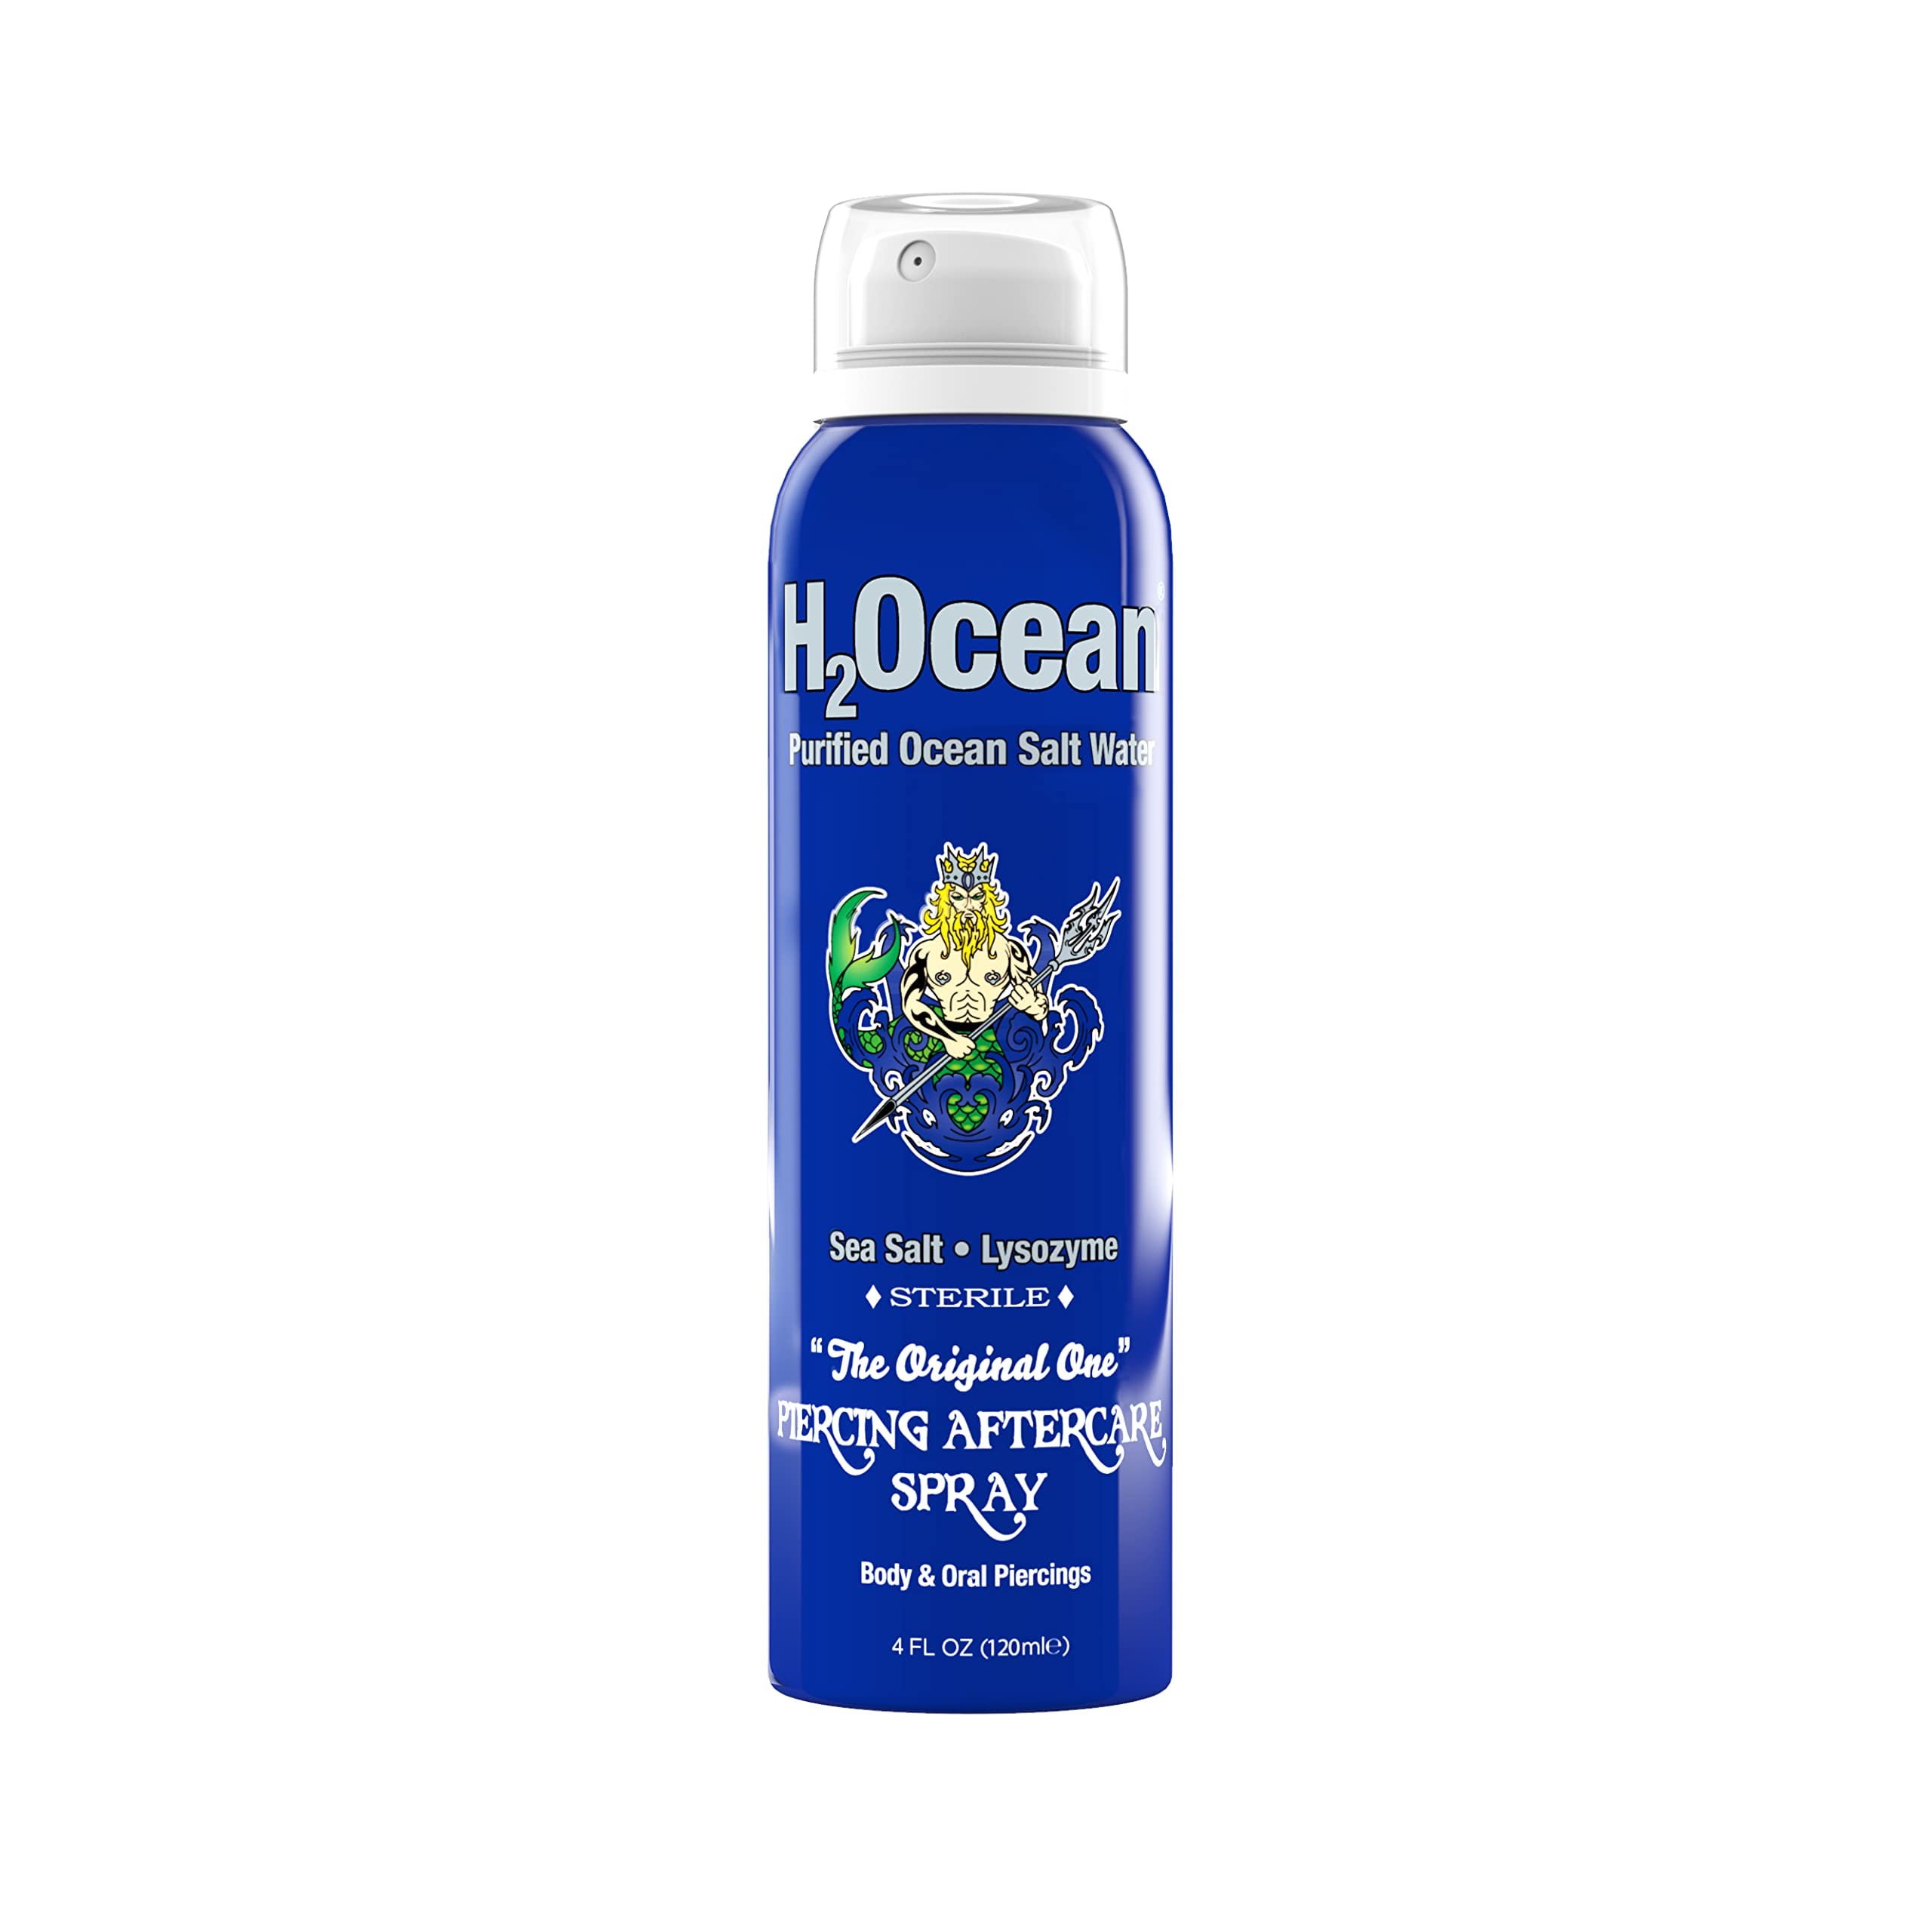 H2Ocean Piercing Aftercare Spray 4oz - Ear, Nose, Earring, Belly Button Piercing Wound Wash Cleaner with Sea Salt Saline Solution - Keloid Bump Scar Removal Treatment